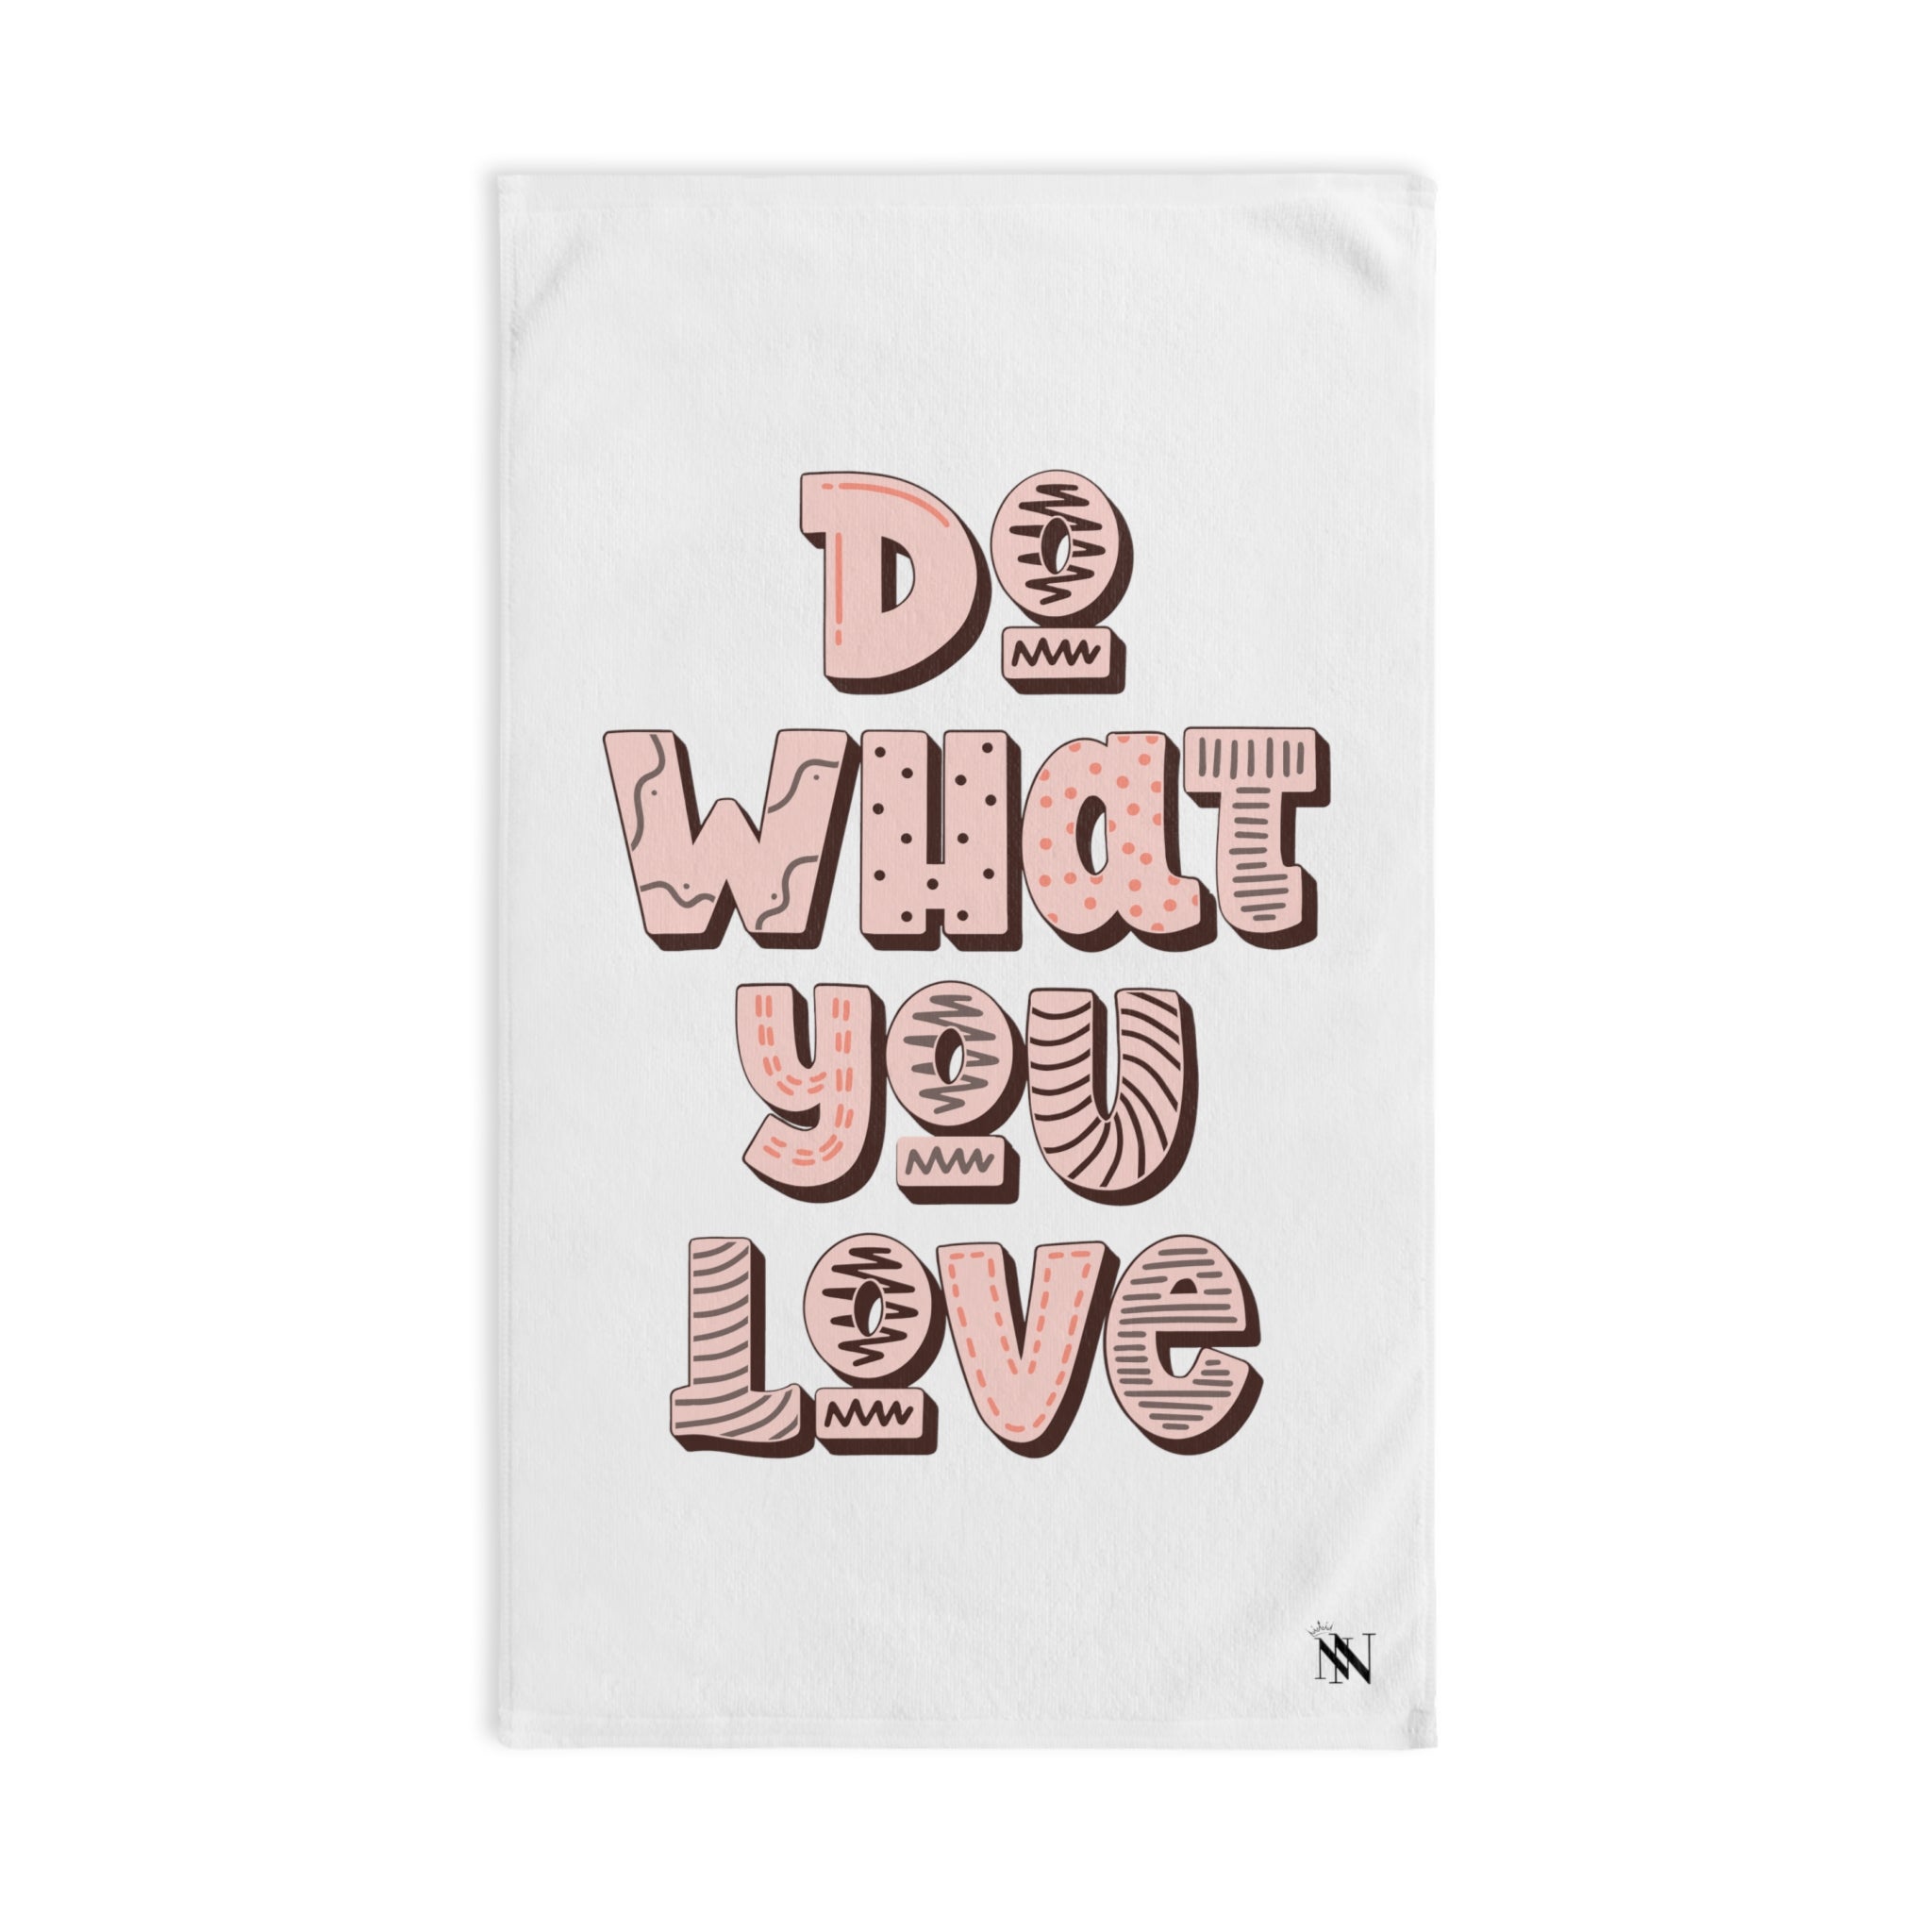 What DO Love YouWhite | Funny Gifts for Men - Gifts for Him - Birthday Gifts for Men, Him, Her, Husband, Boyfriend, Girlfriend, New Couple Gifts, Fathers & Valentines Day Gifts, Christmas Gifts NECTAR NAPKINS